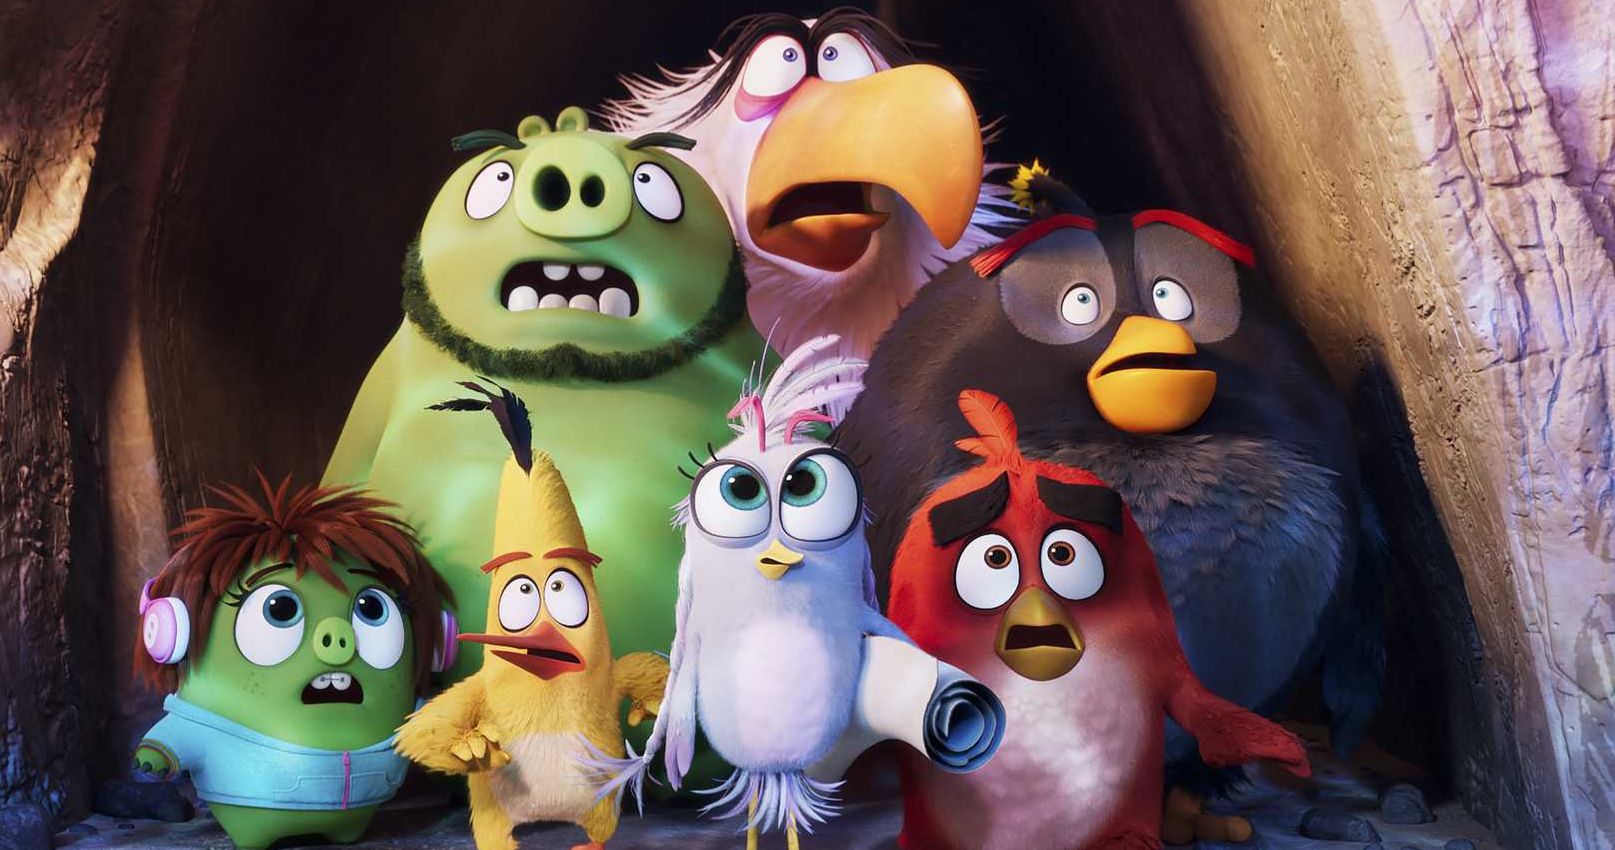 The Angry Birds Movie 2 Review: A Fun Sequel That Surpasses the First